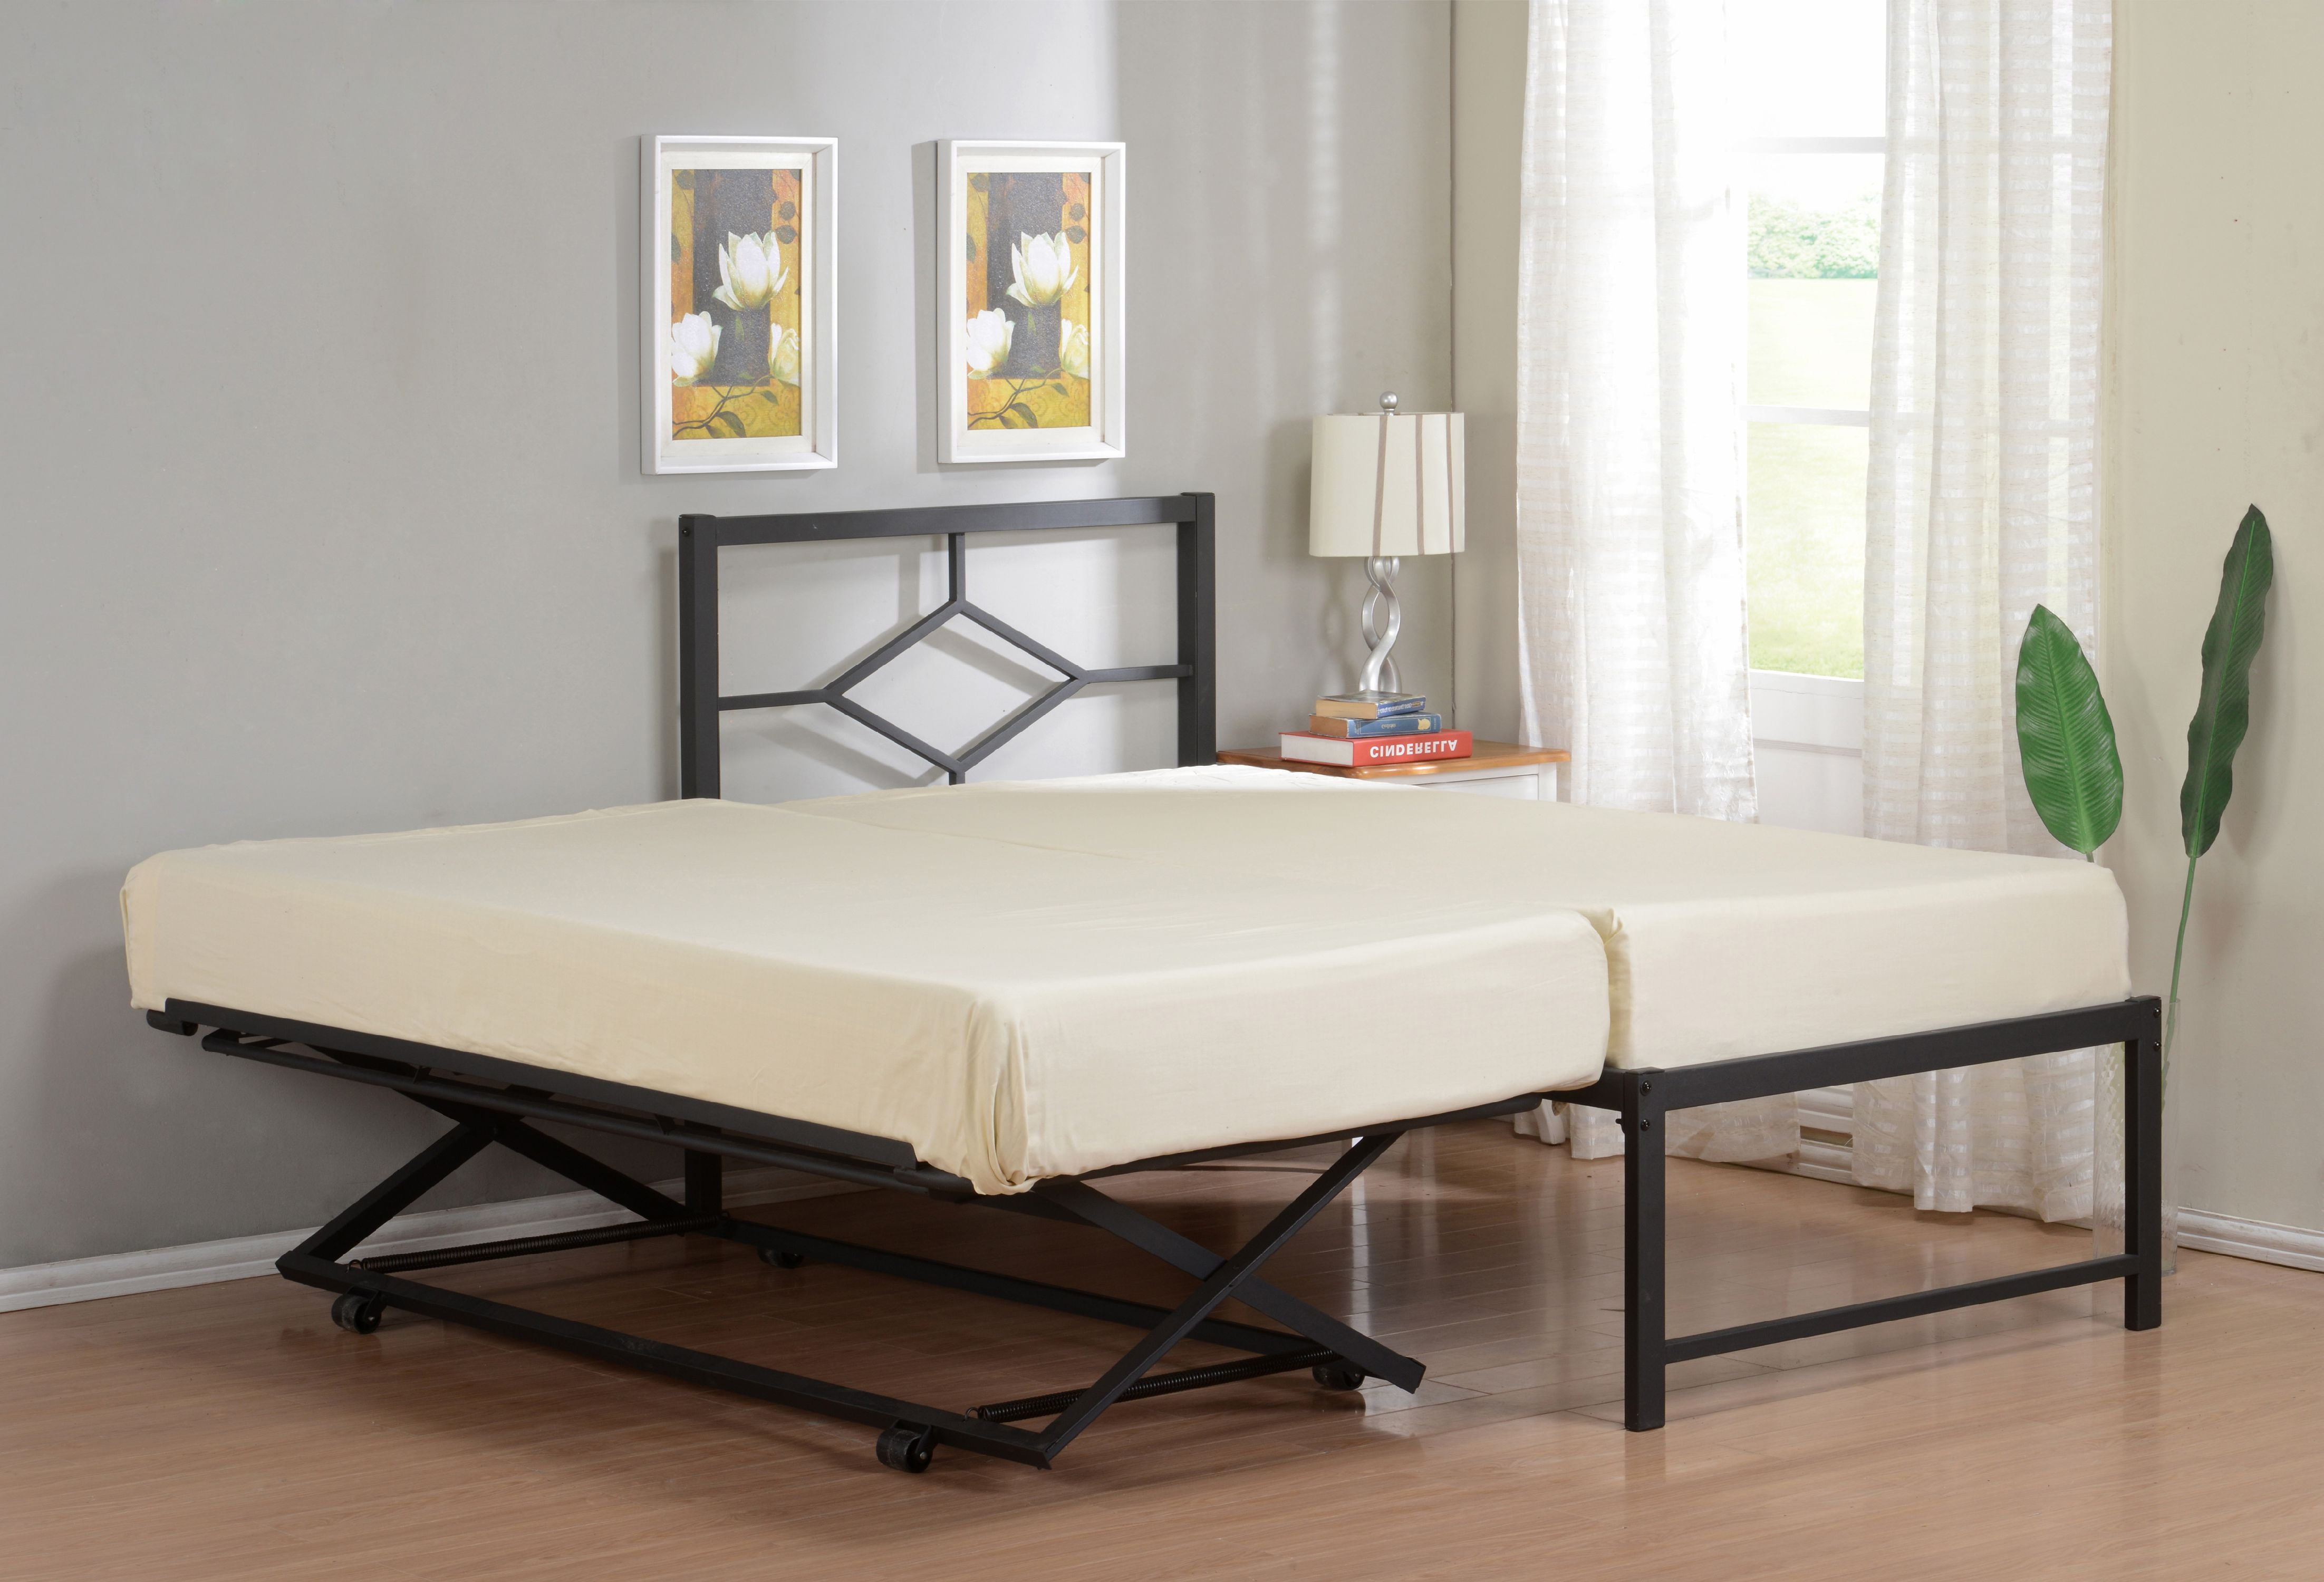 Platform Daybed With Pop Up Trundle, Full Size Roll Out Trundle Bed Frame